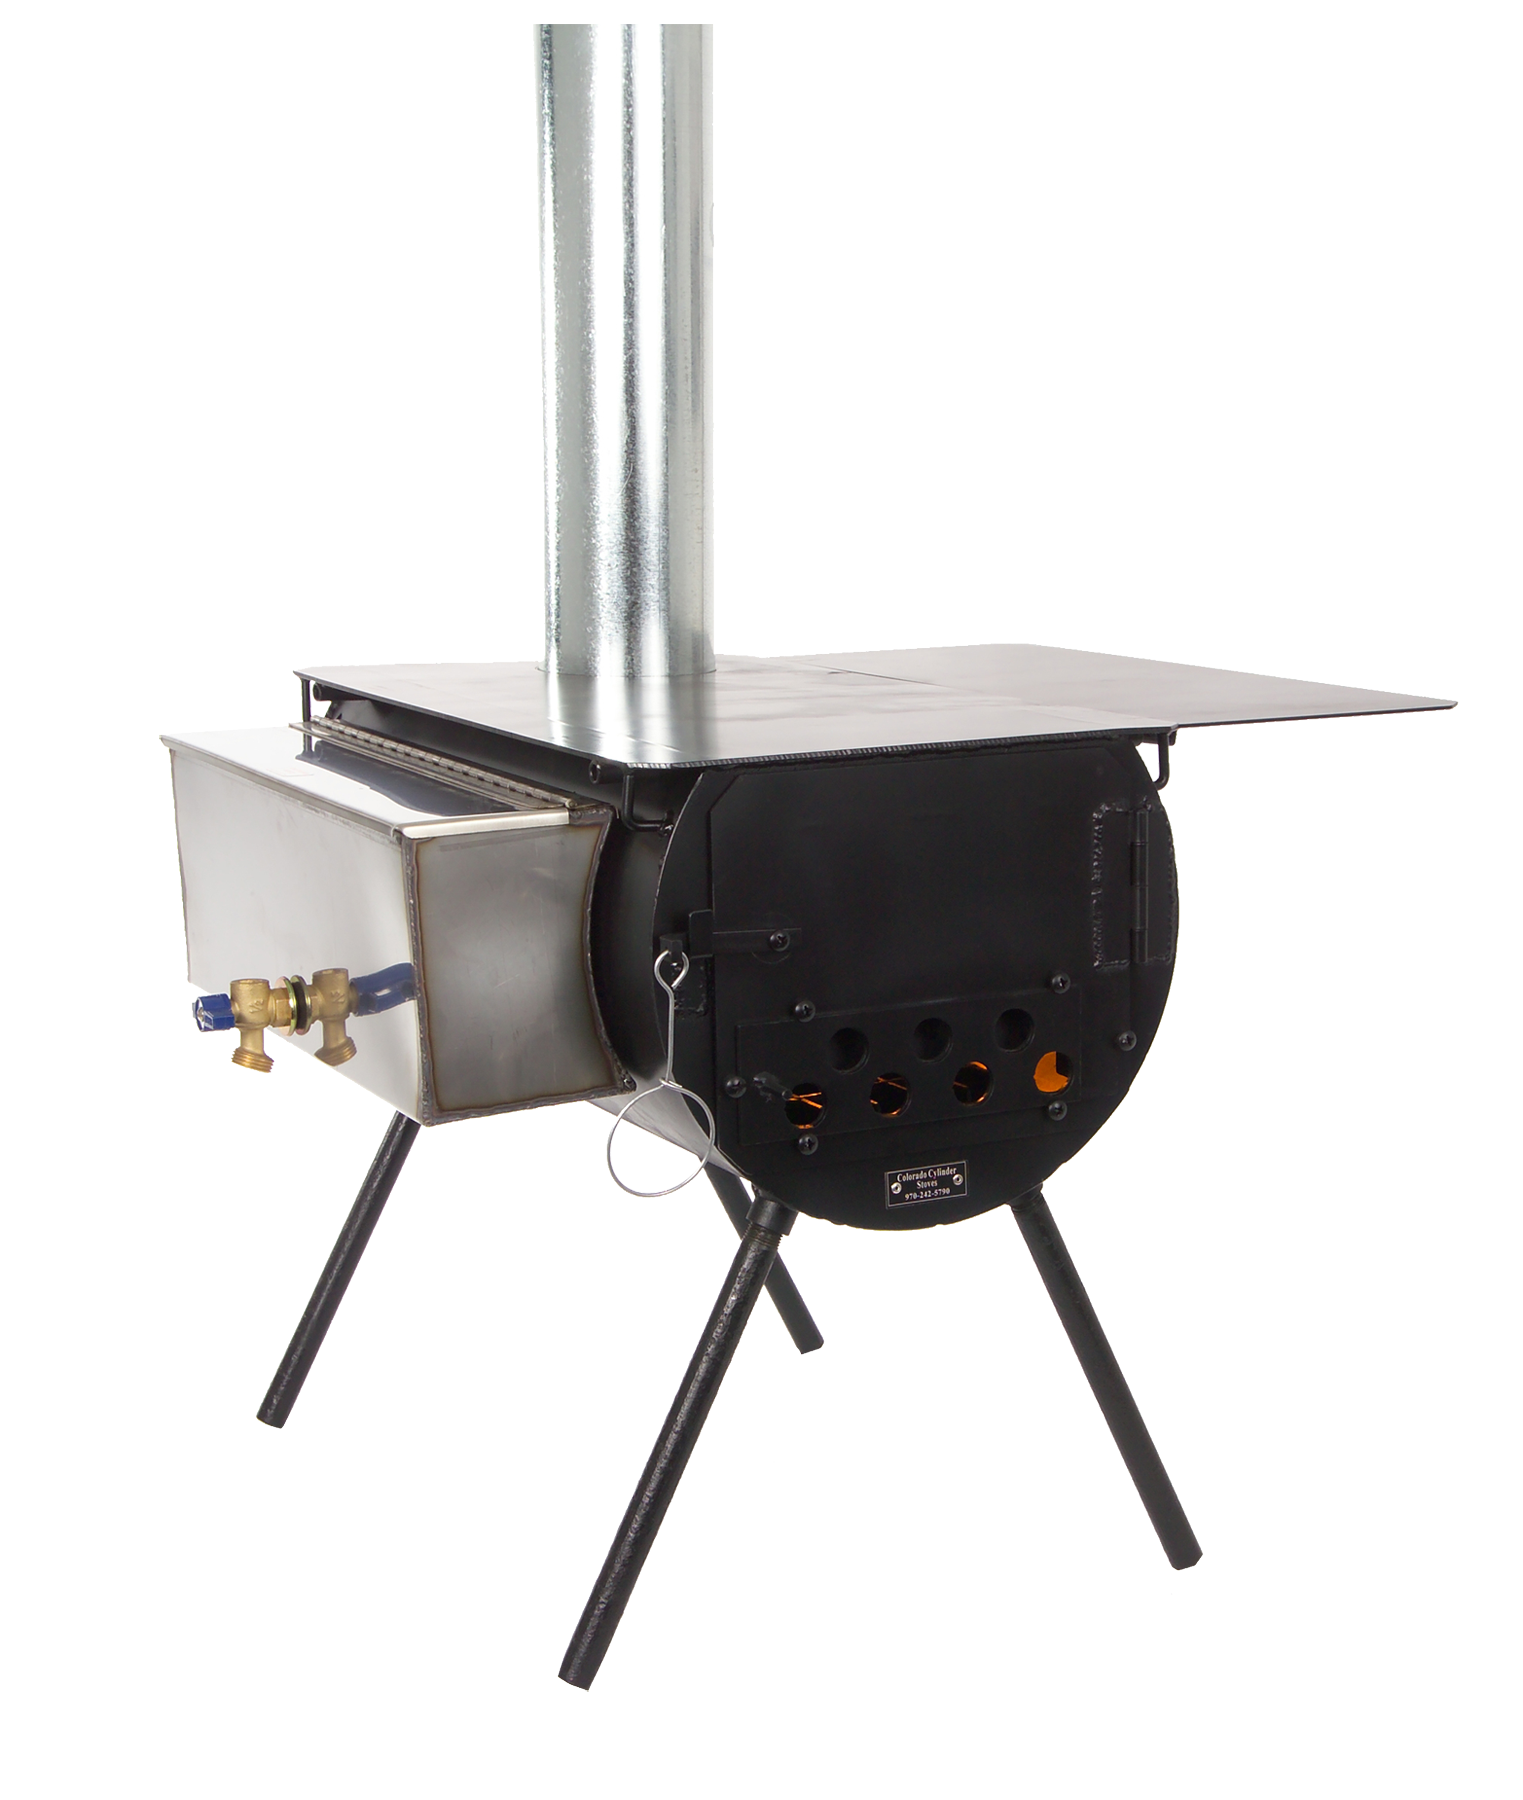 Timberline Outdoor Patio Wood Pellet Heater (Does it really work